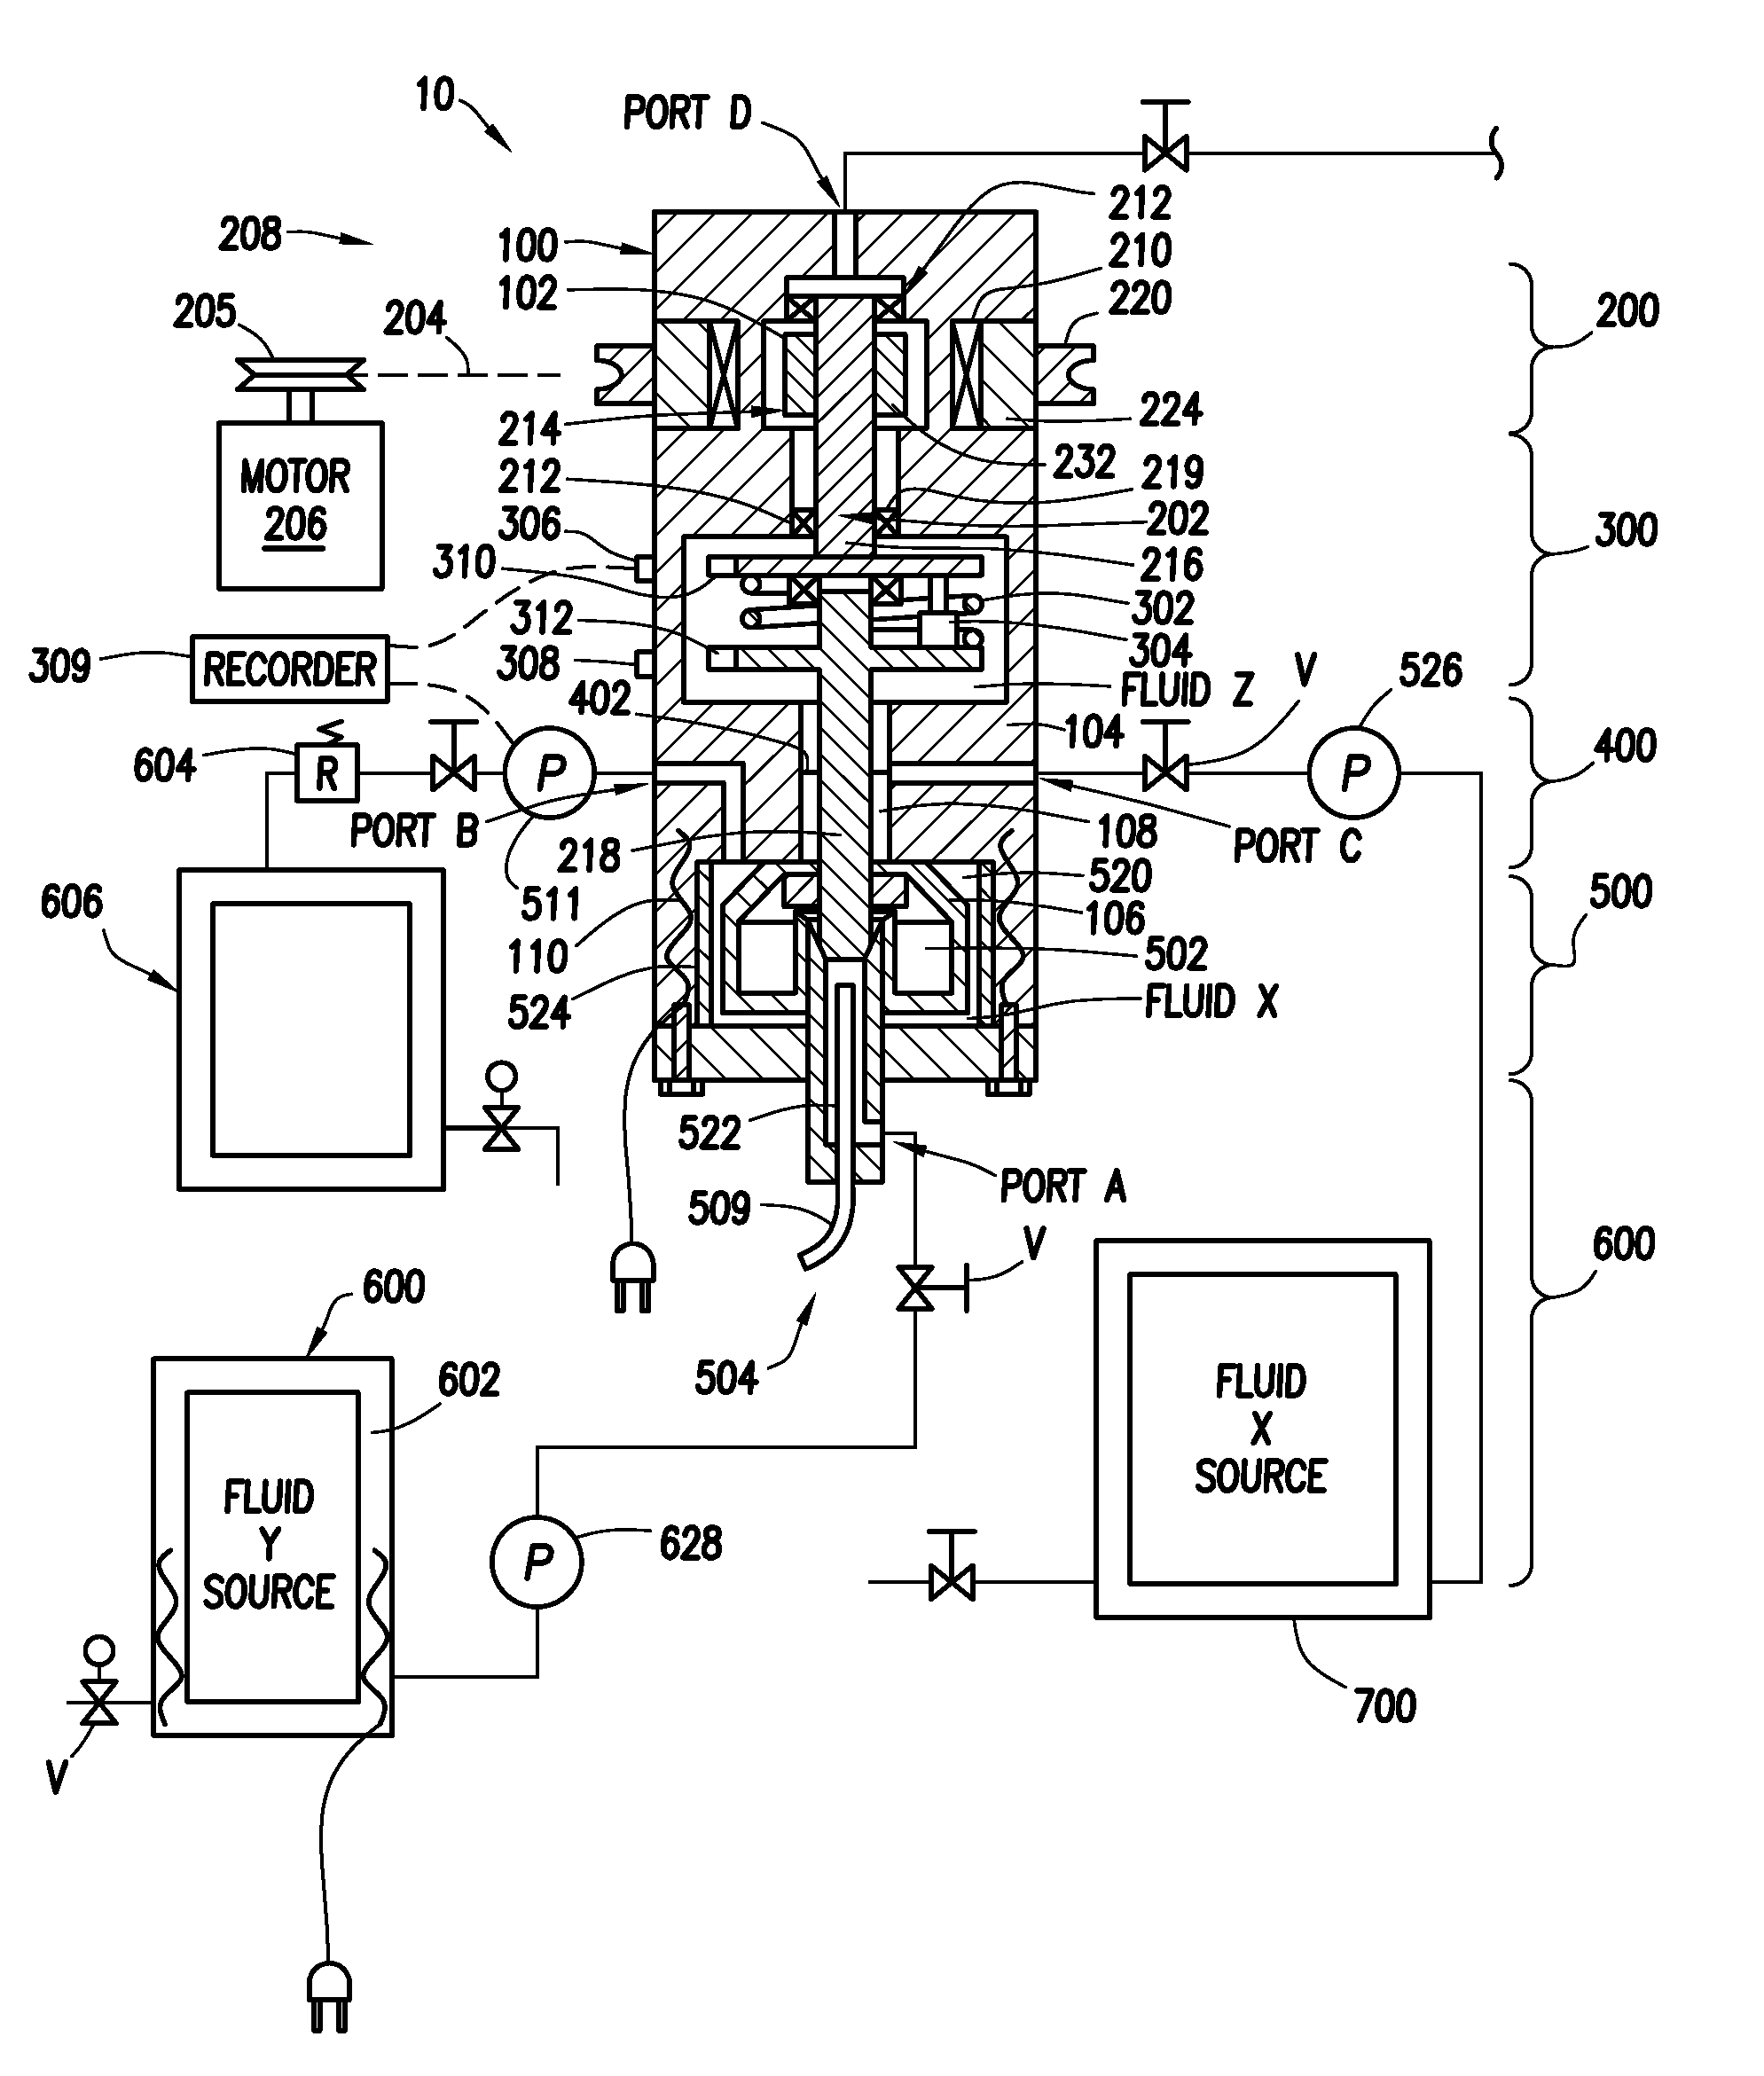 Apparatus and methods for continuous compatibility testing of subterranean fluids and their compositions under wellbore conditions